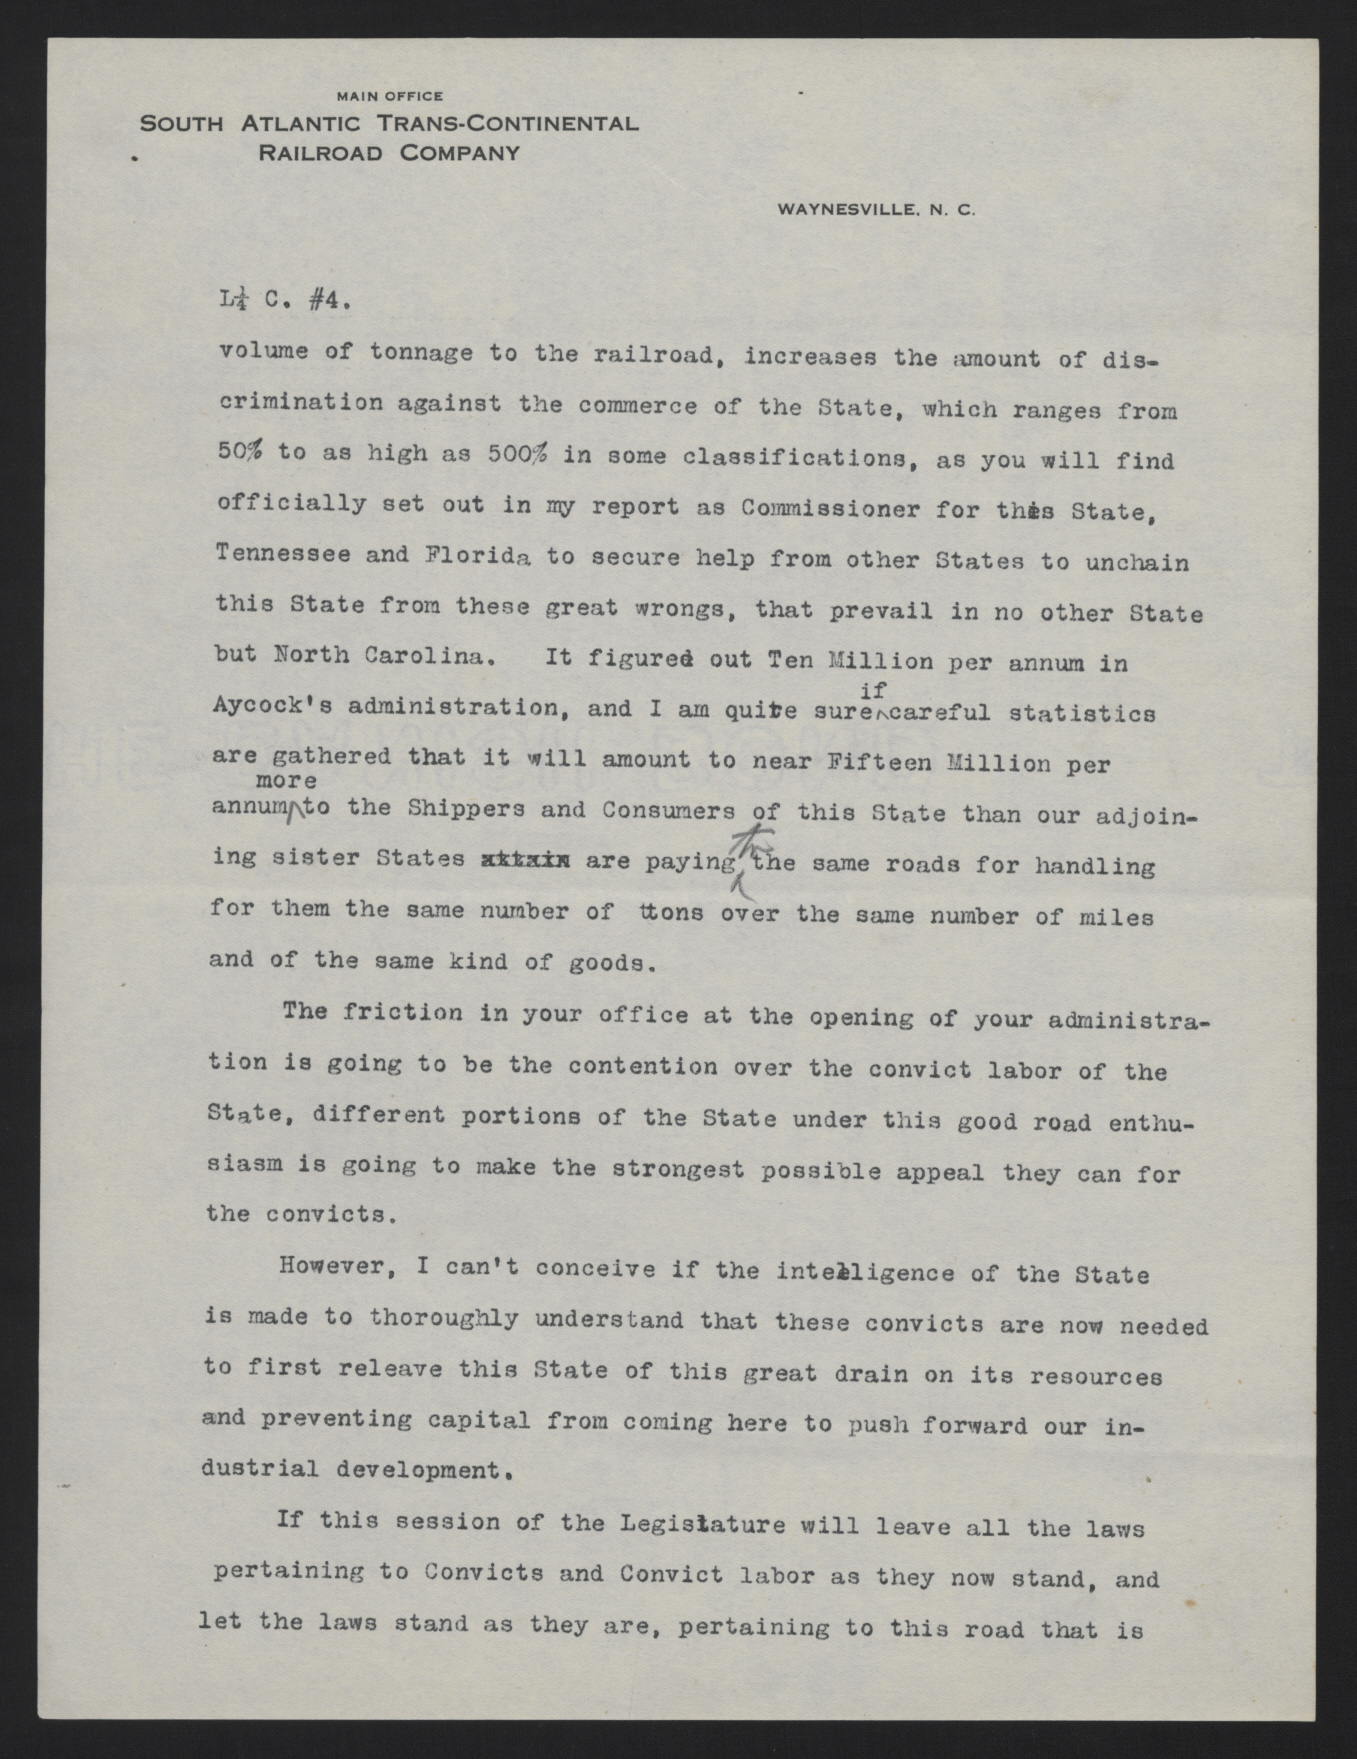 Letter from Jones to Craig, December 7, 1912, page 4